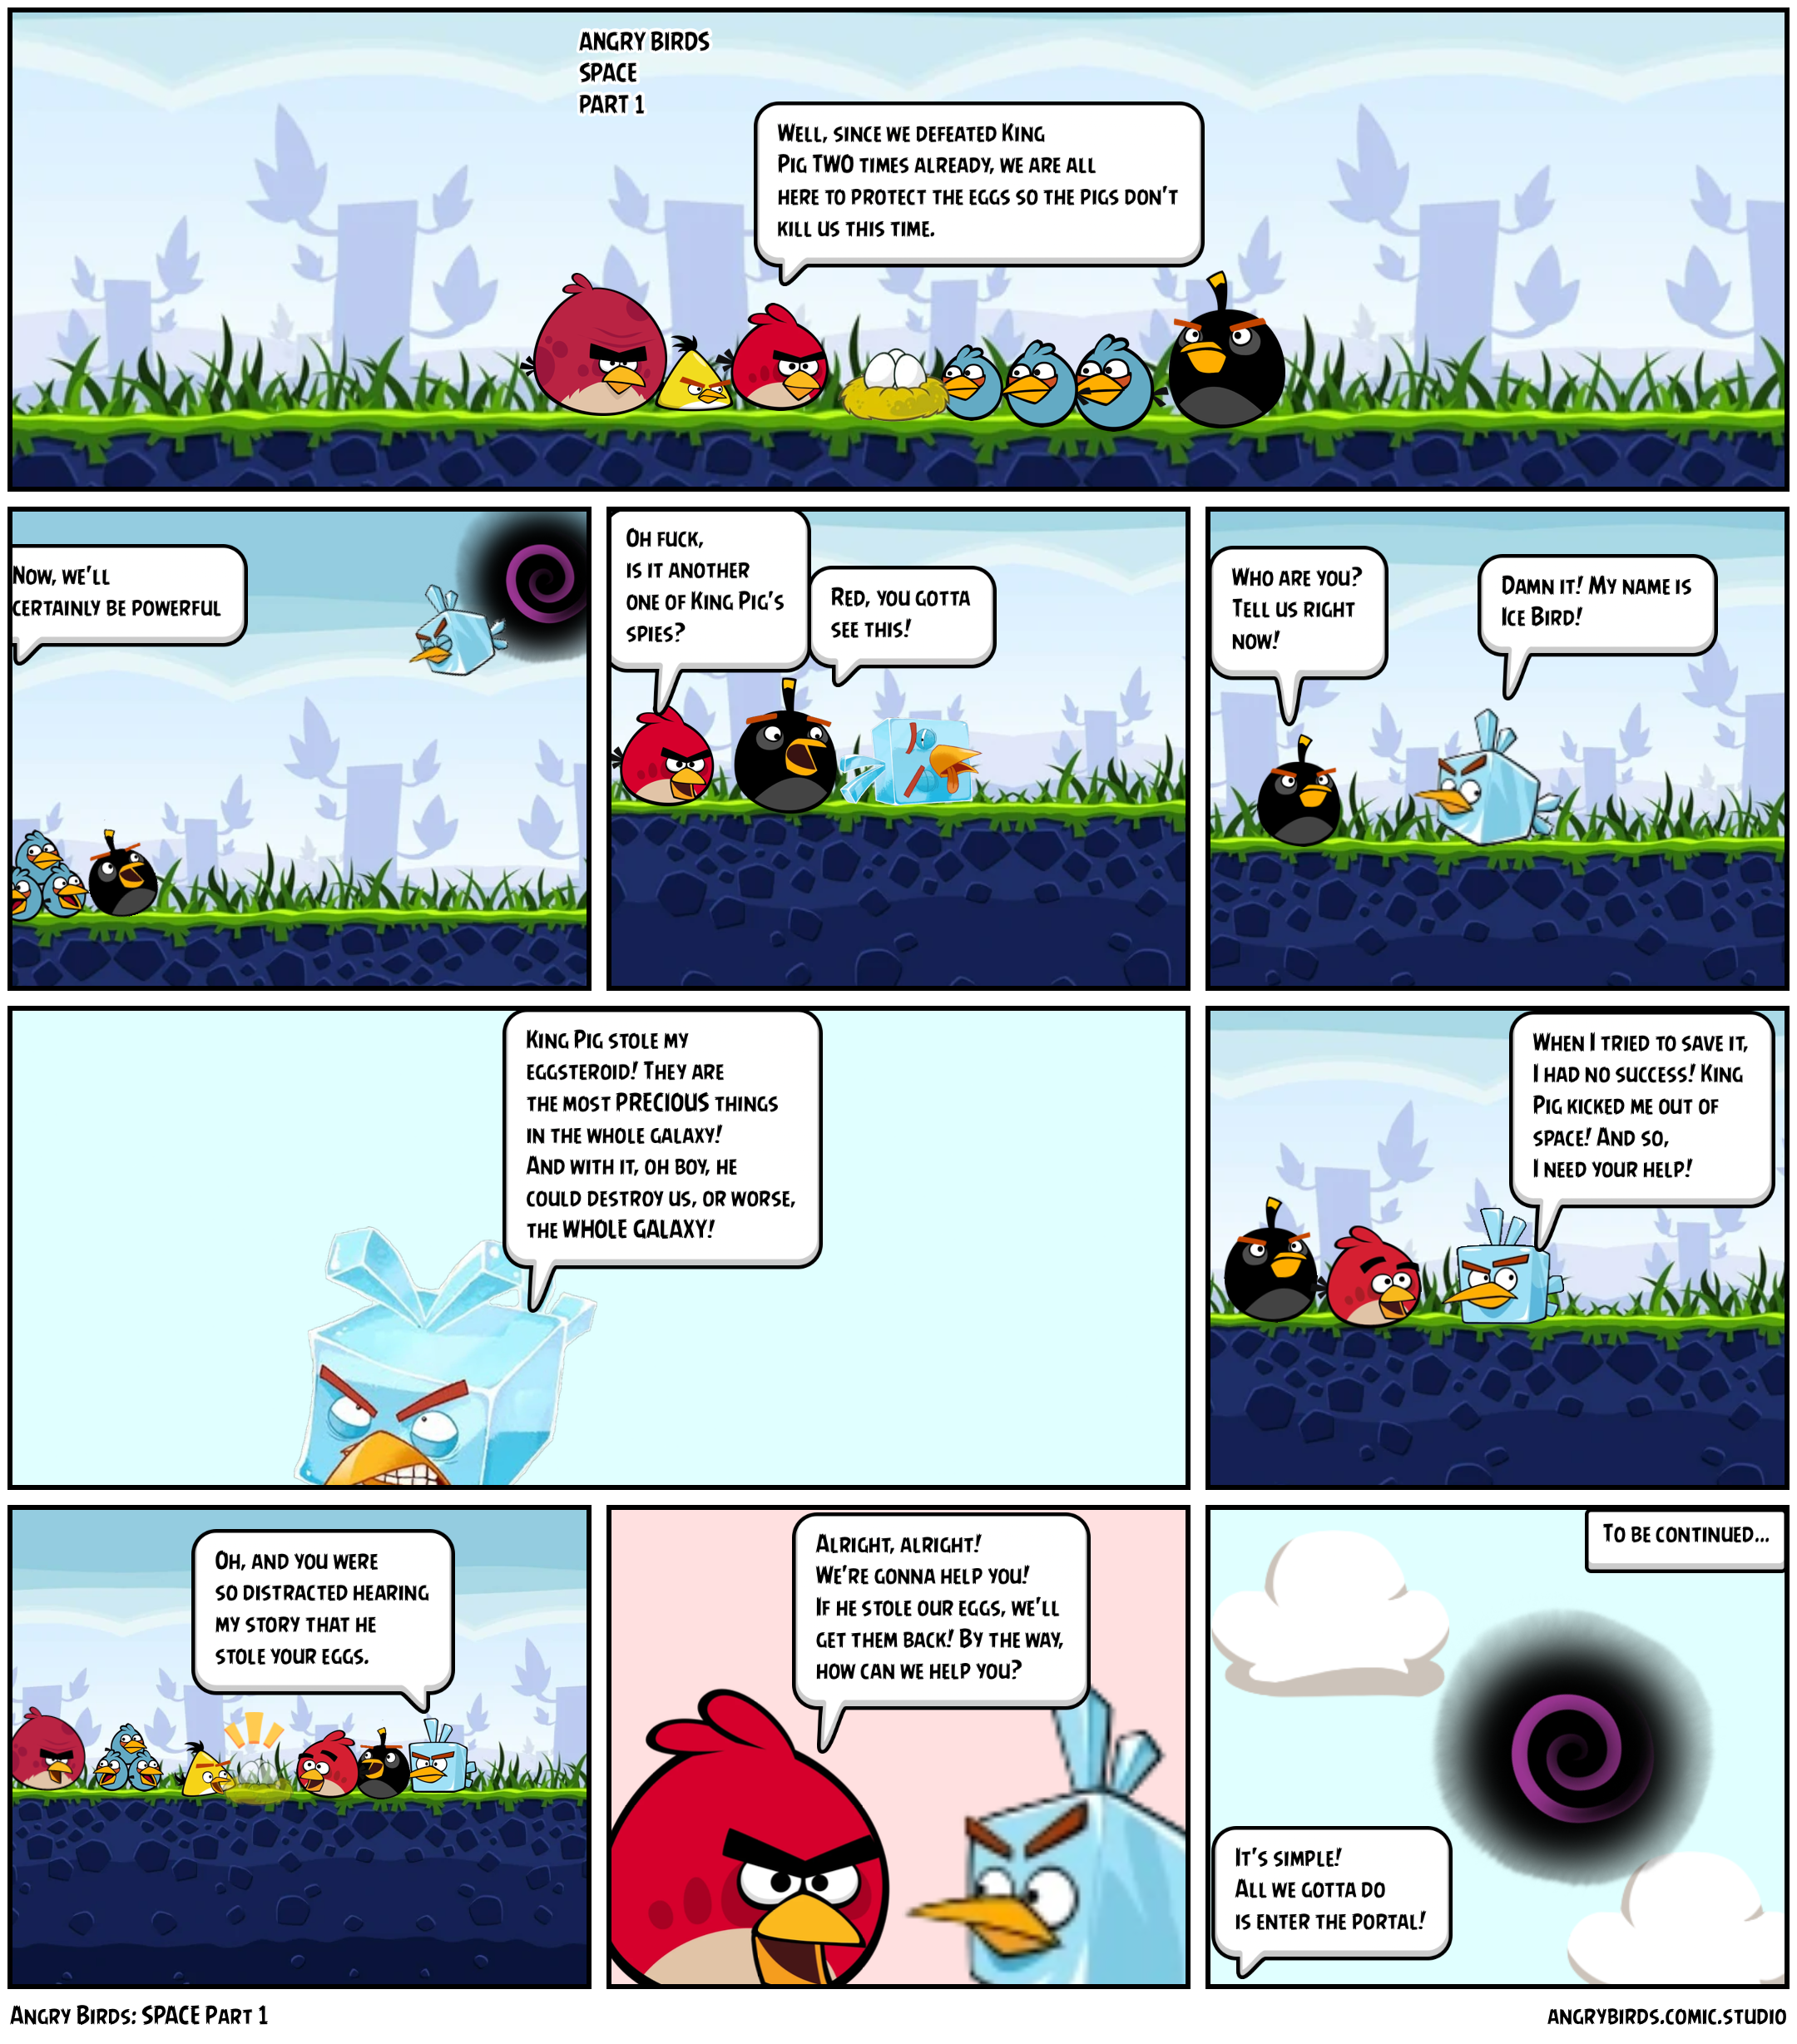 Angry Birds: SPACE Part 1